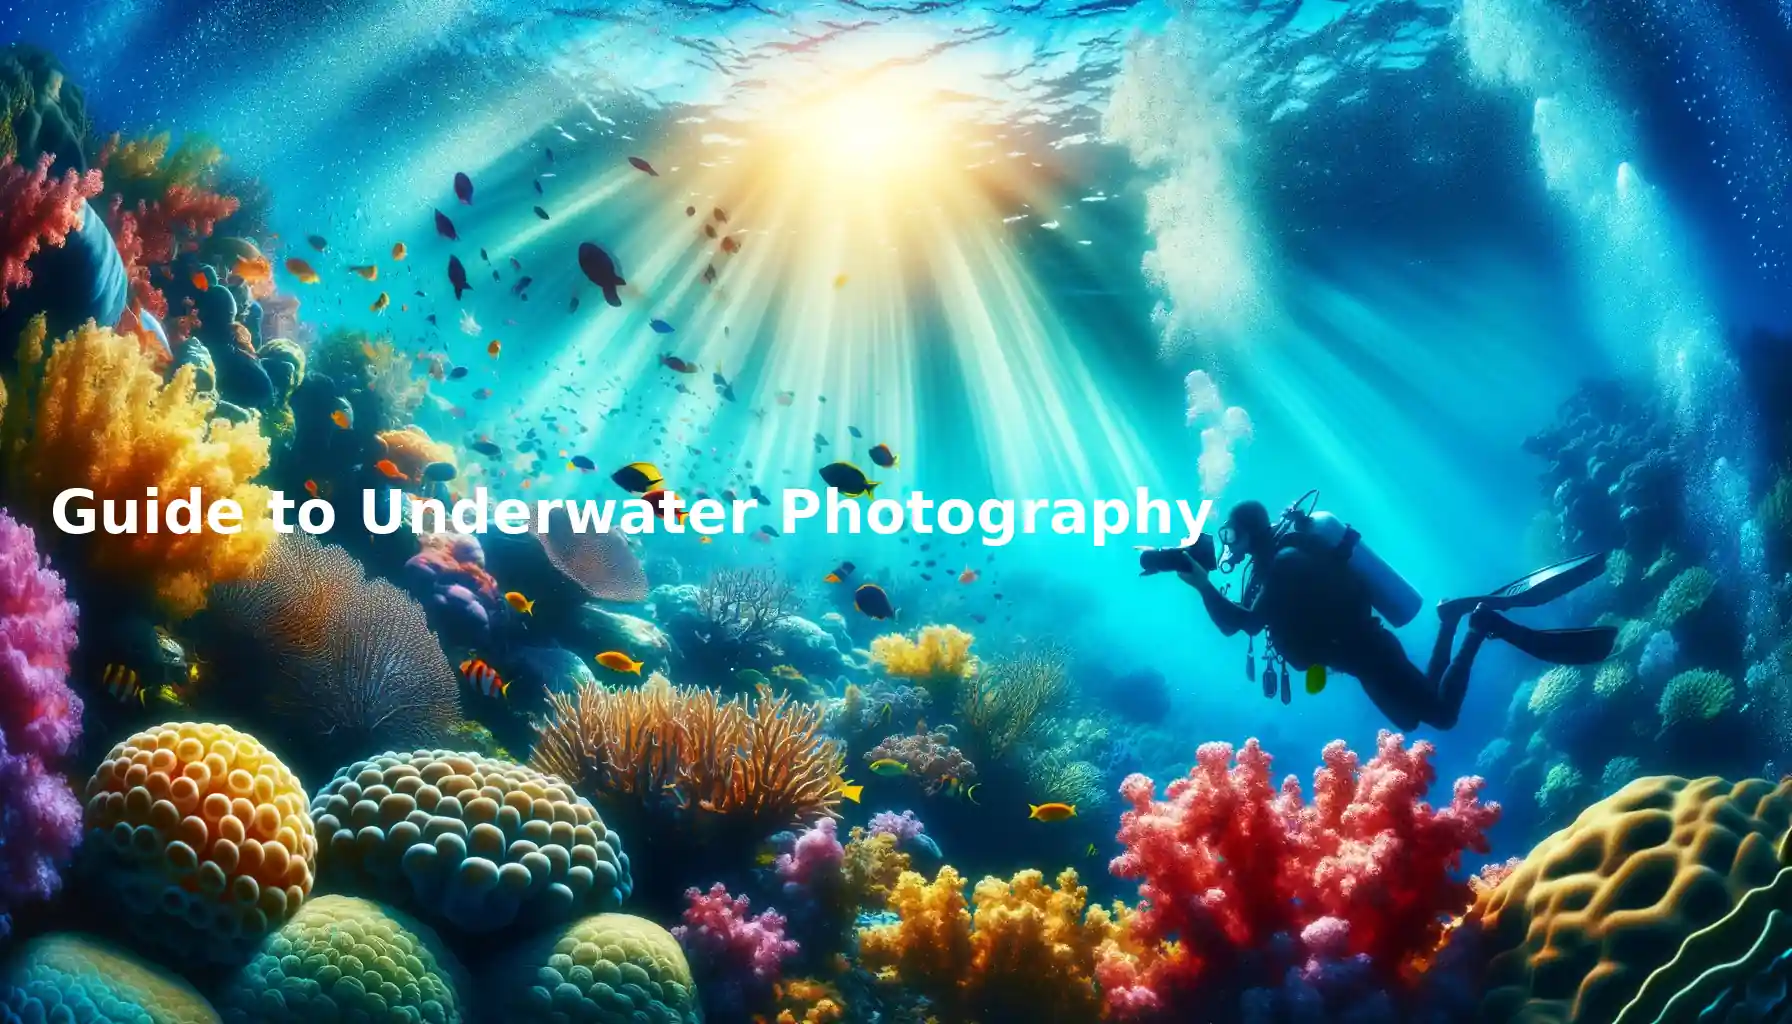 Guide to Underwater Photography